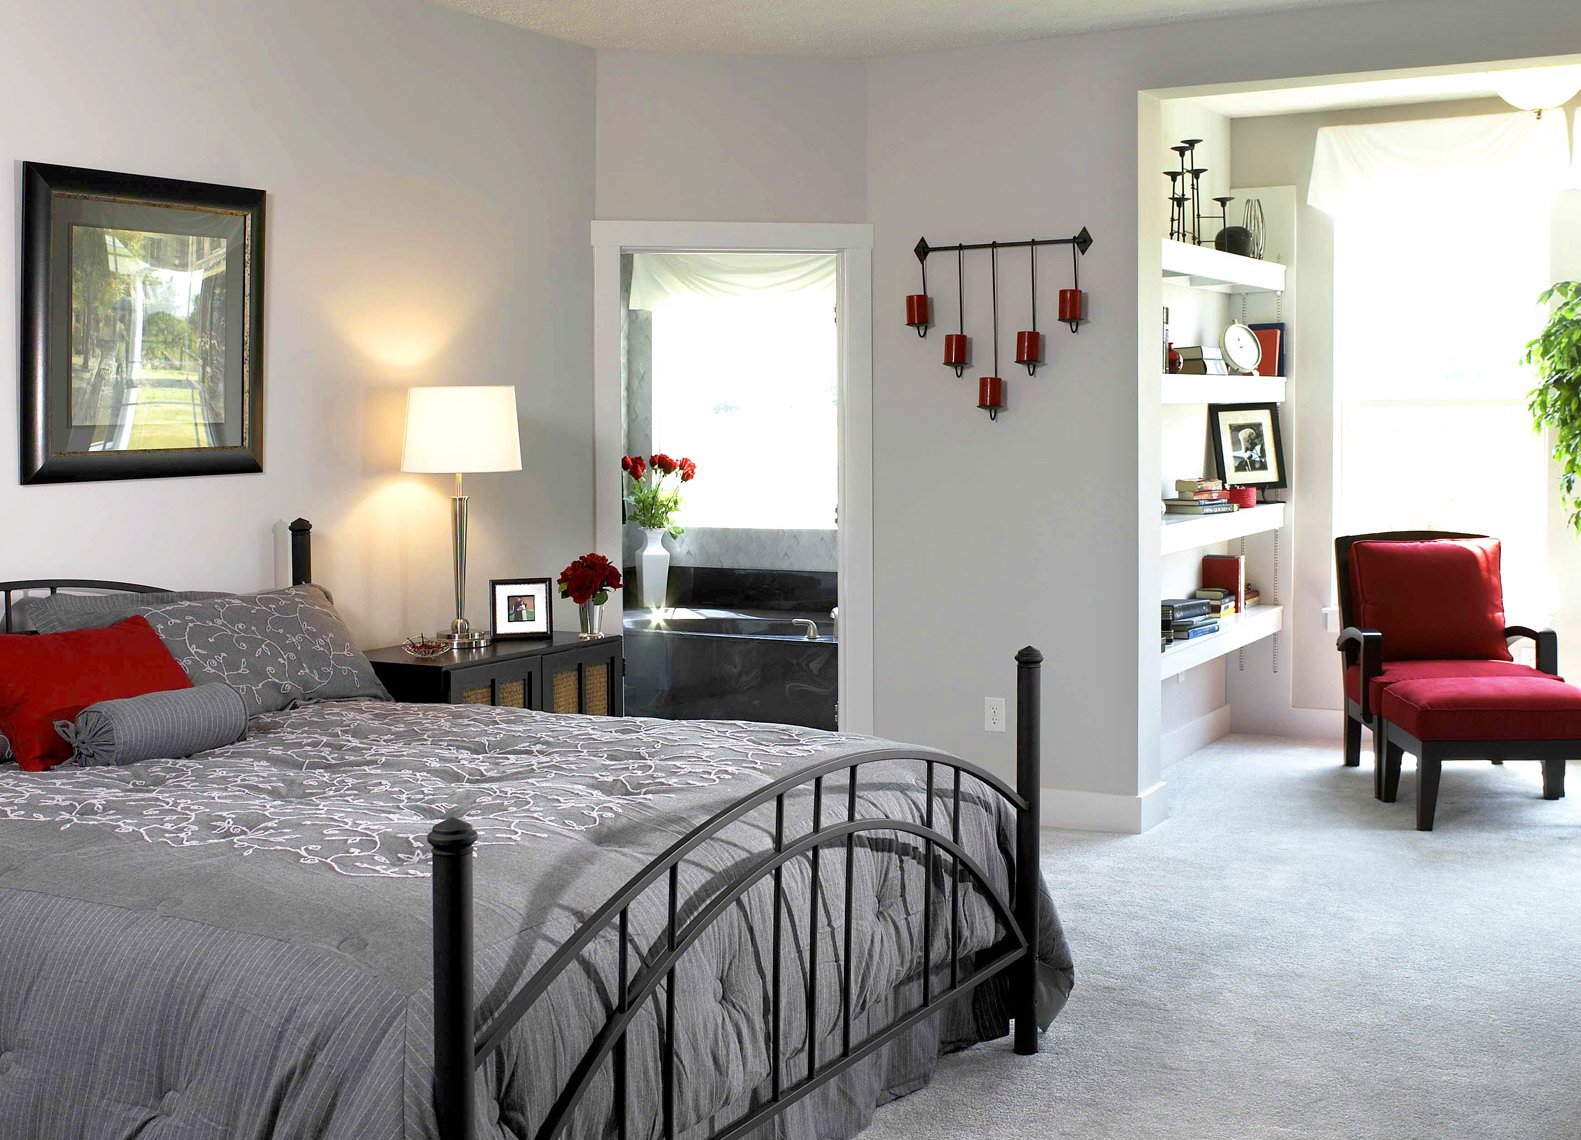 Red And Grey Bedroom Ideas